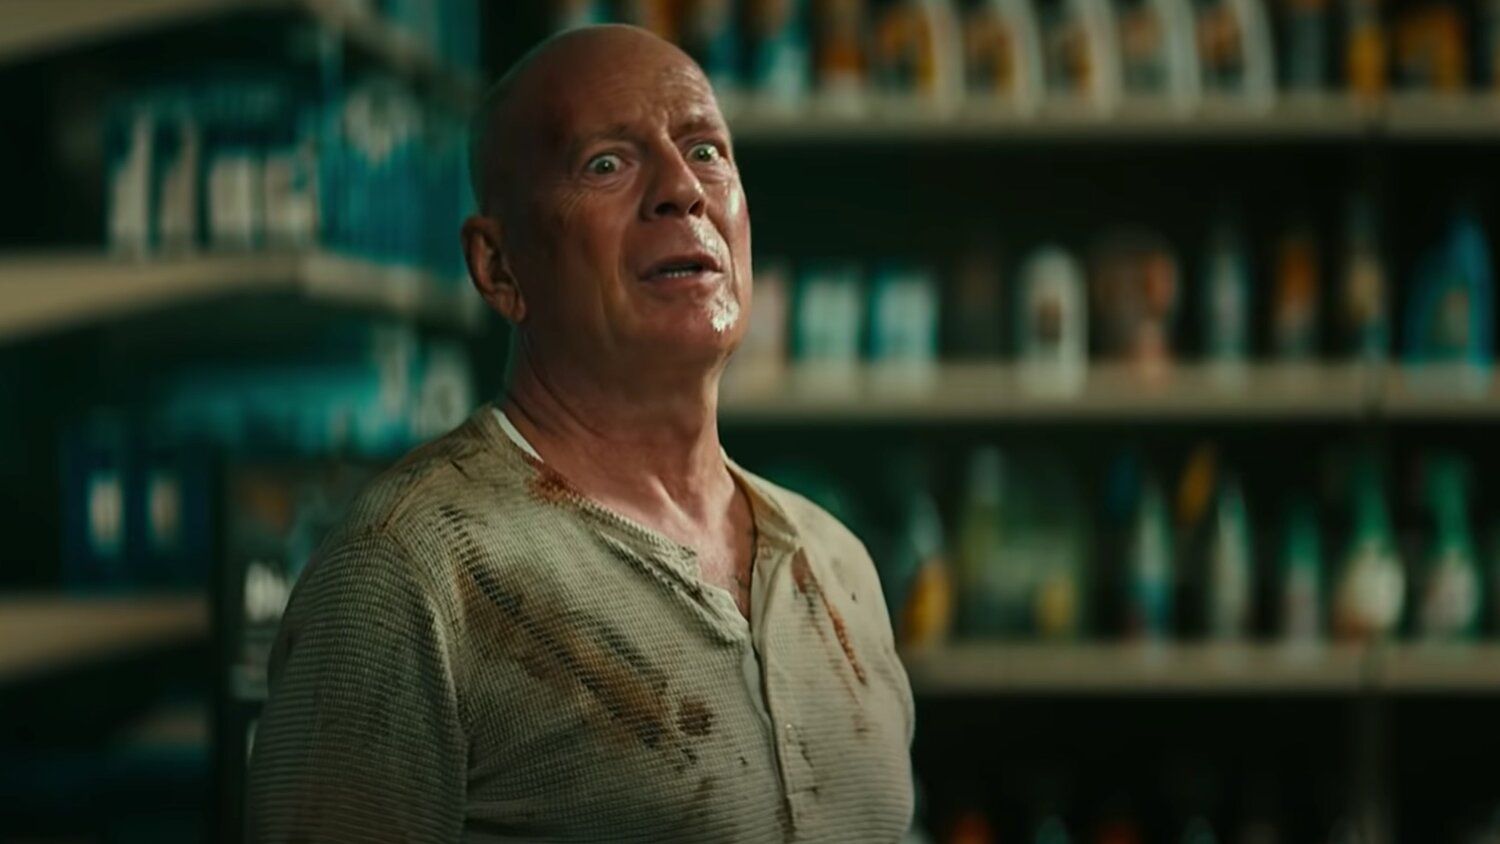 John McClane Is Back In Action In Great DIE HARD Themed Commercial